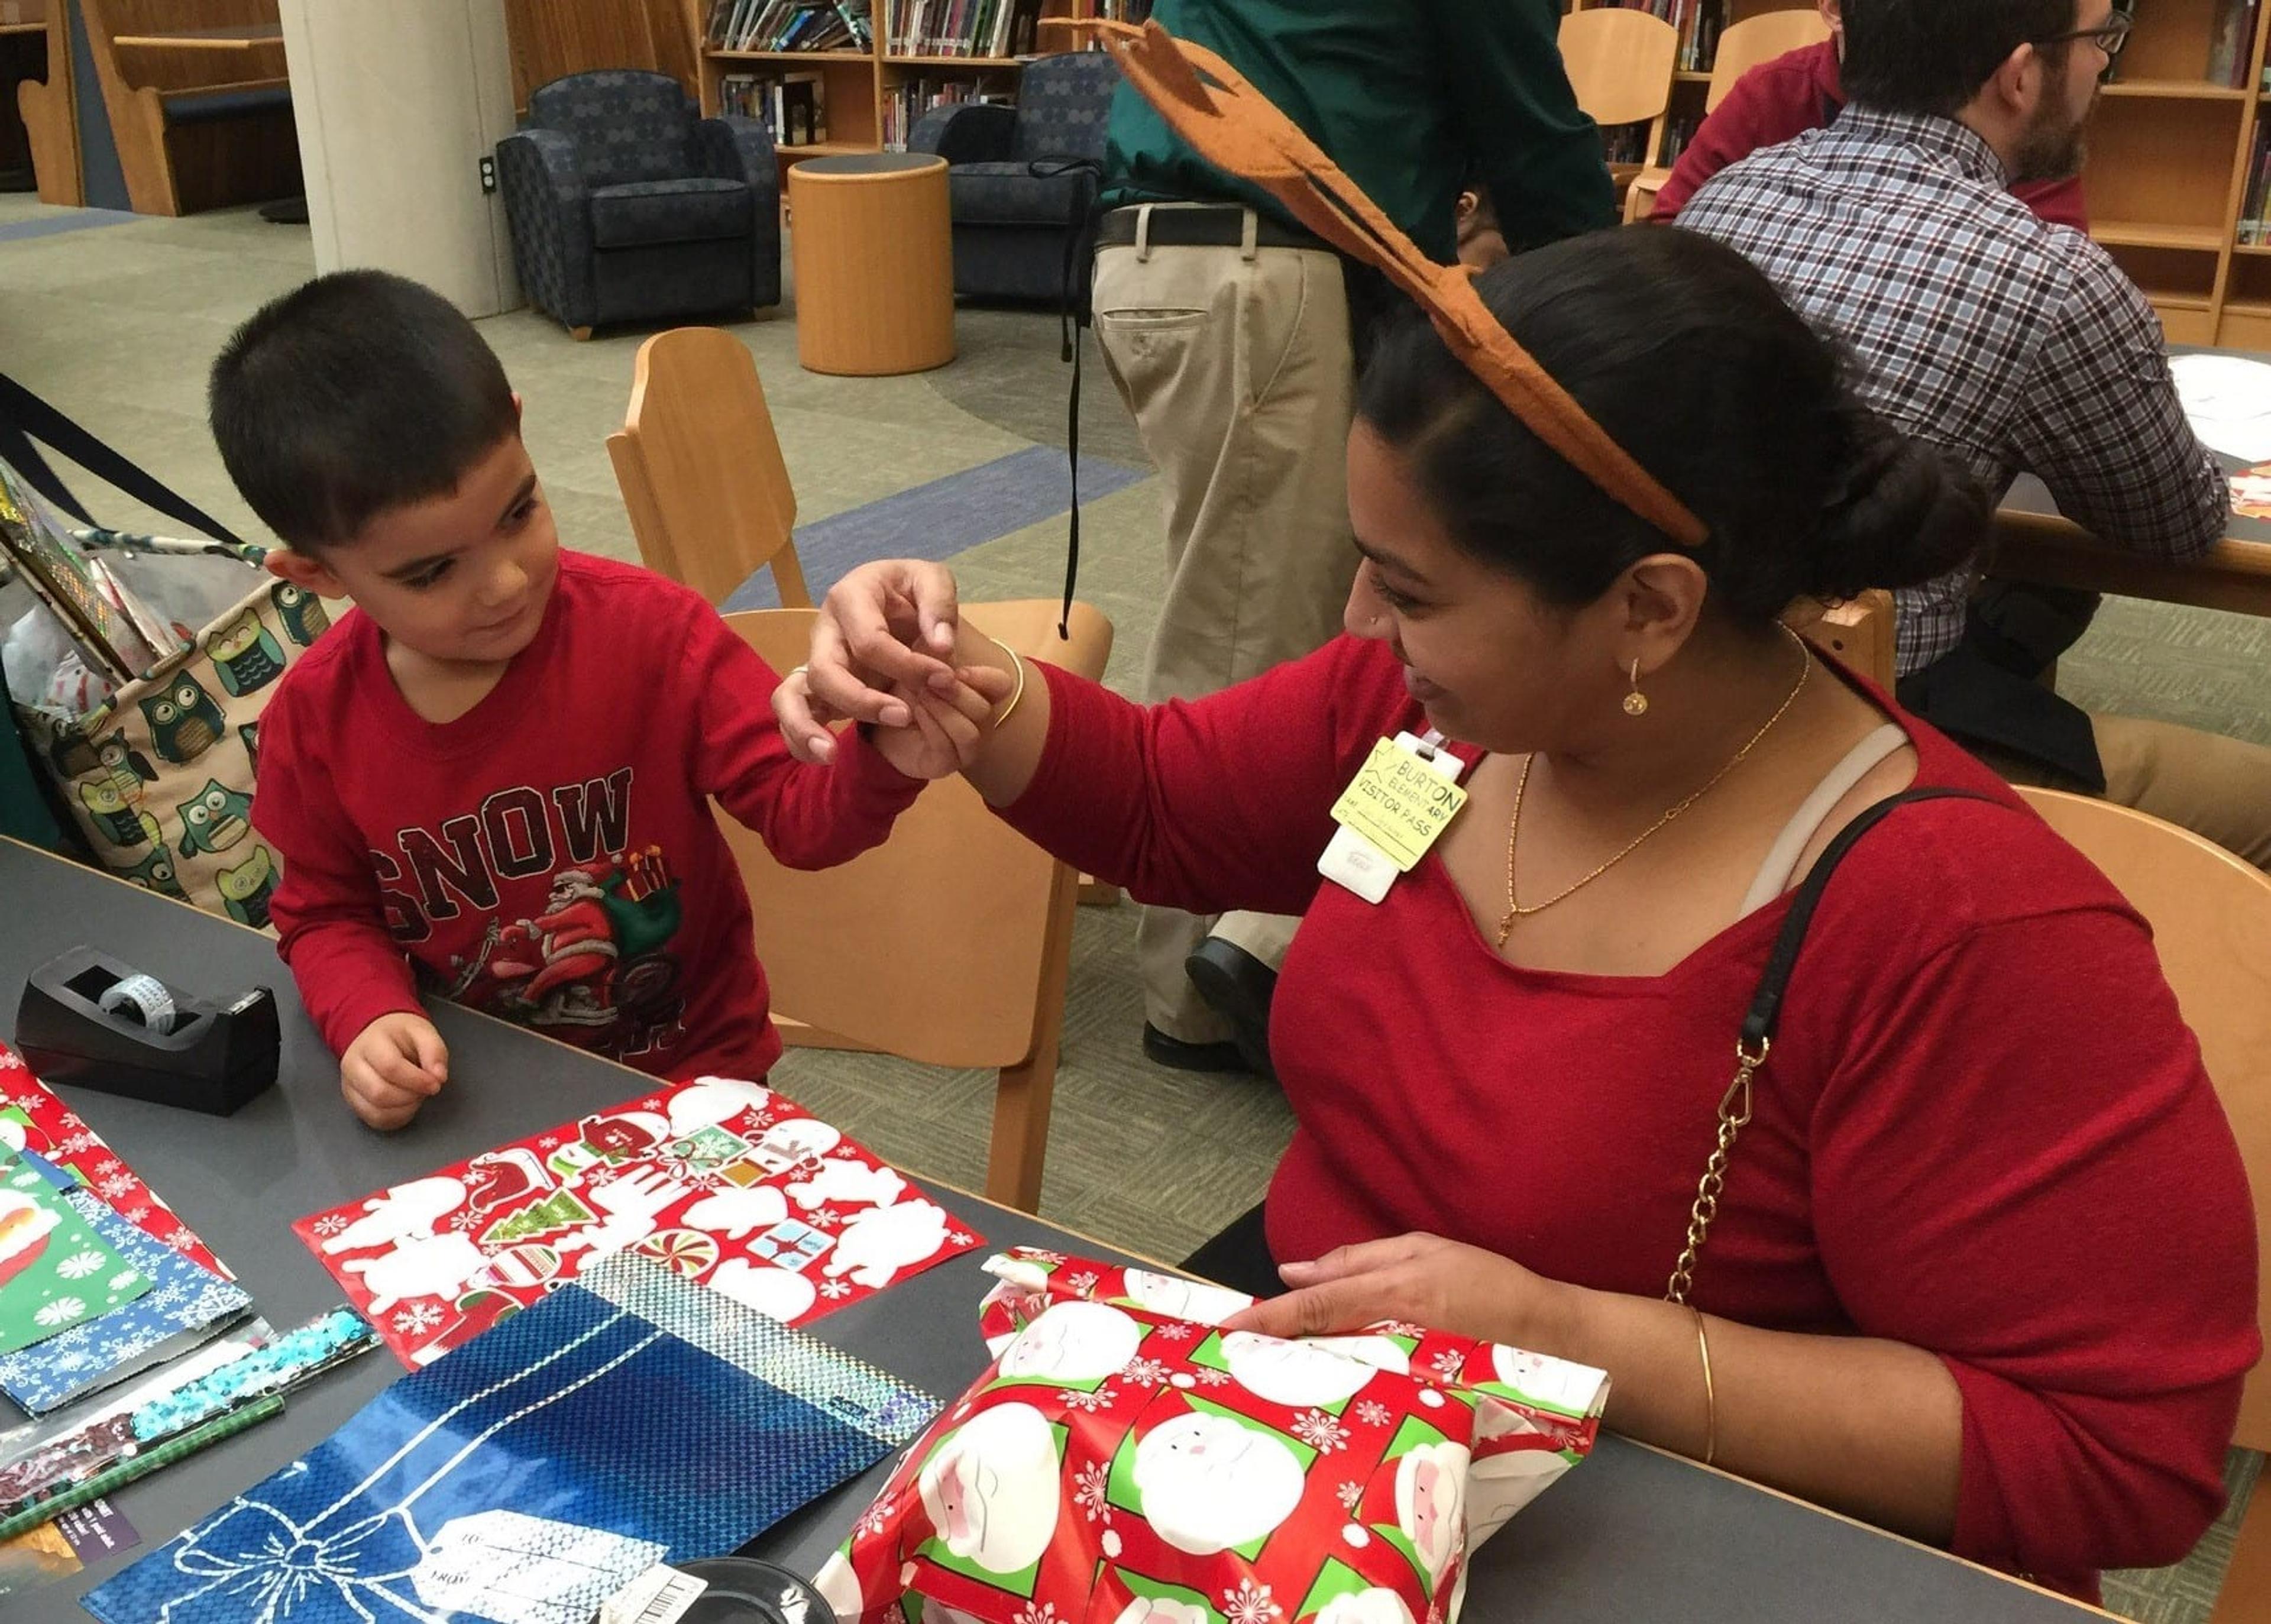 Amy Abraham helps a young shopper wrap his gifts.